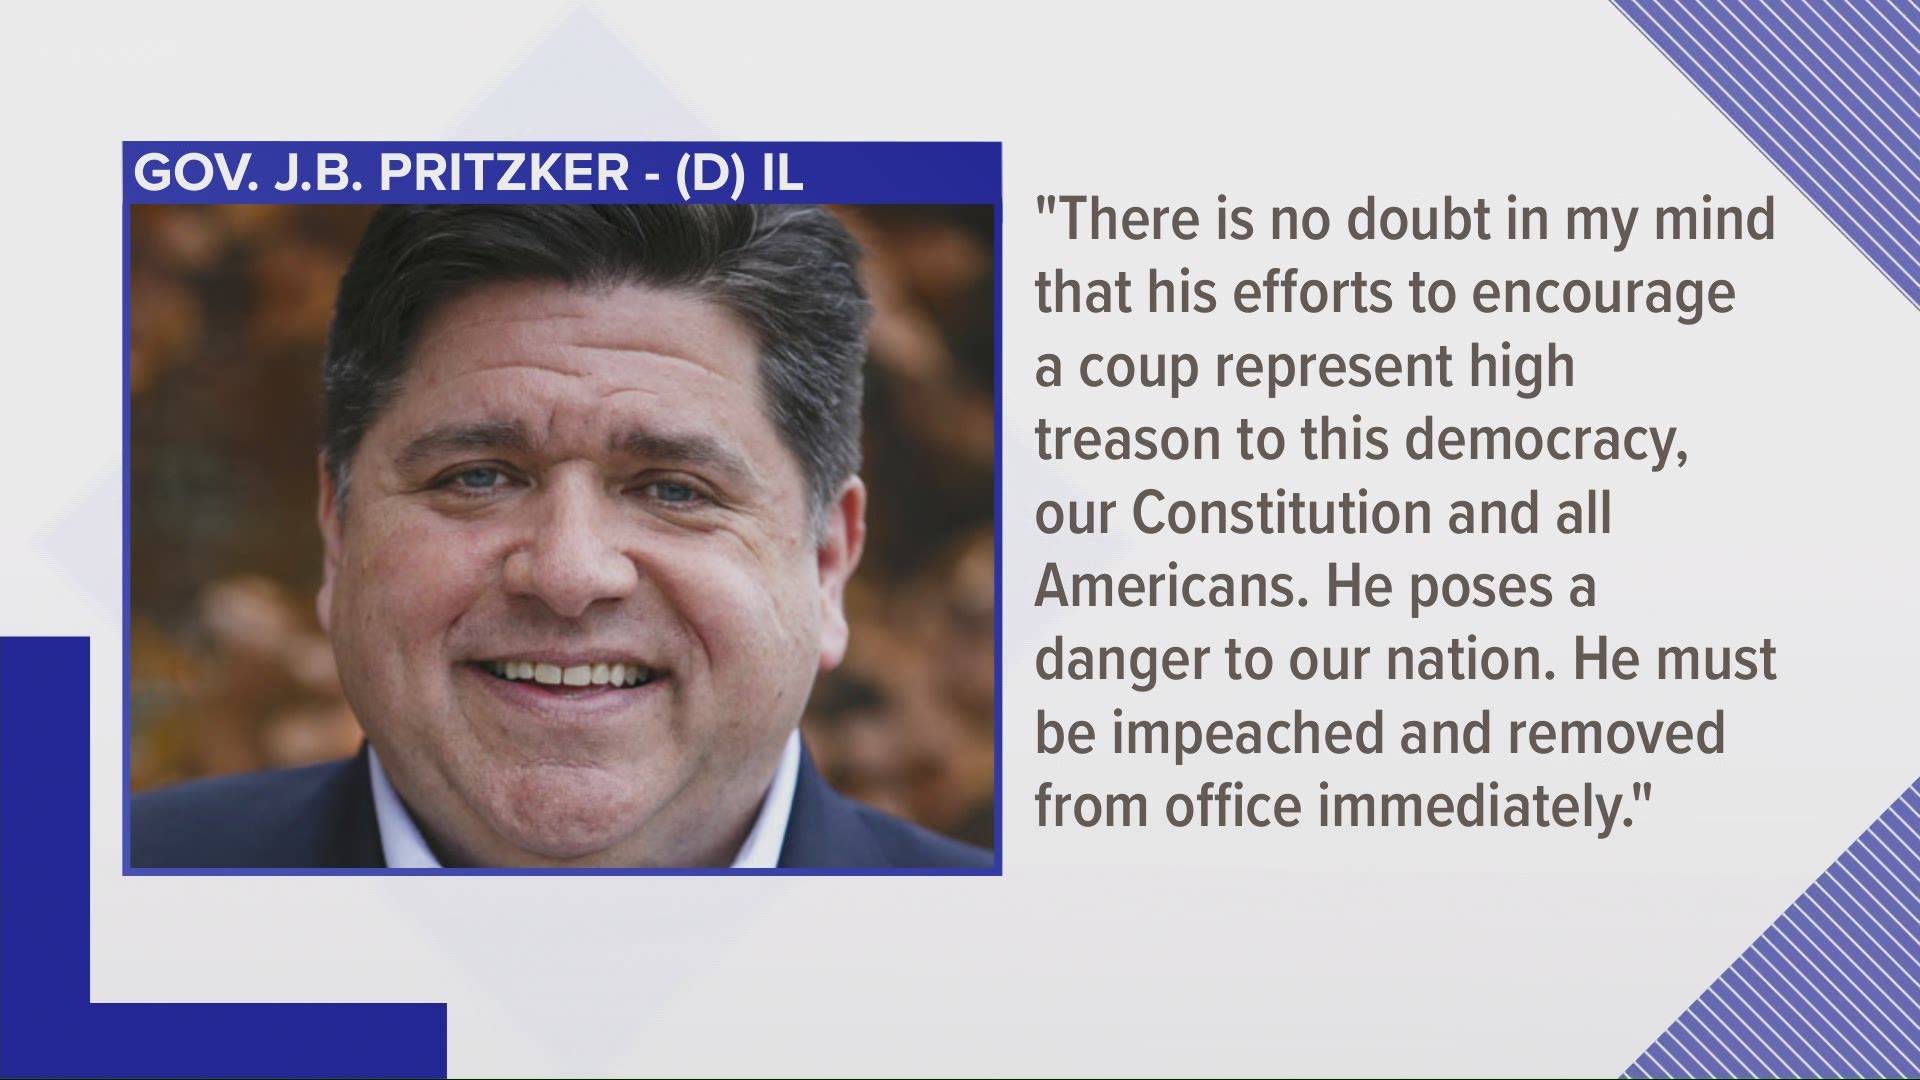 "There is no doubt in my mind that his efforts to encourage a coup represent high treason to this democracy, our Constitution and all Americans"